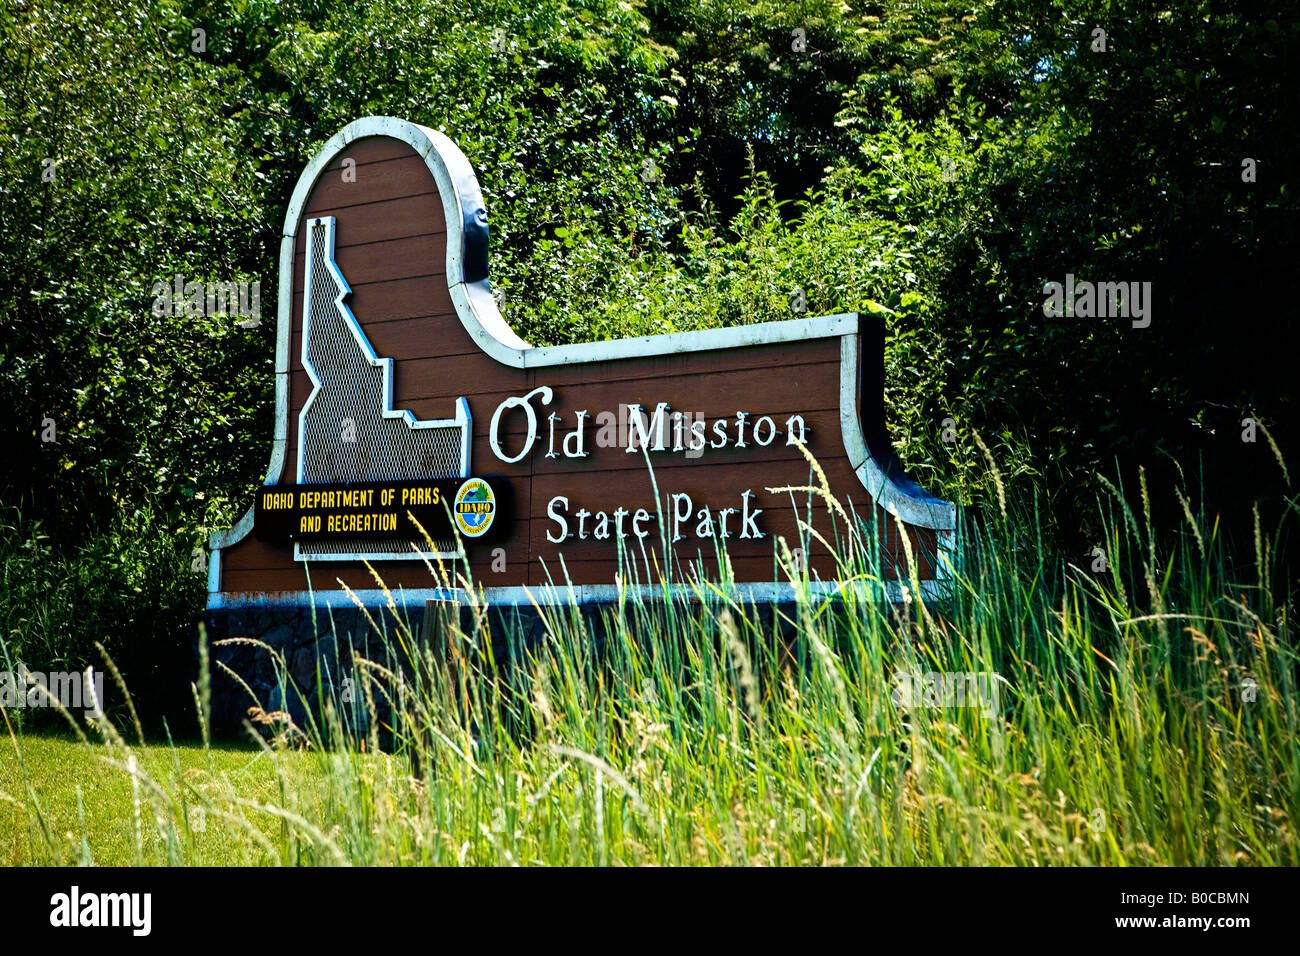 Image of the welcome sign for the Old Mission State Park in Cataldo Idaho Summer morning light Stock Photo